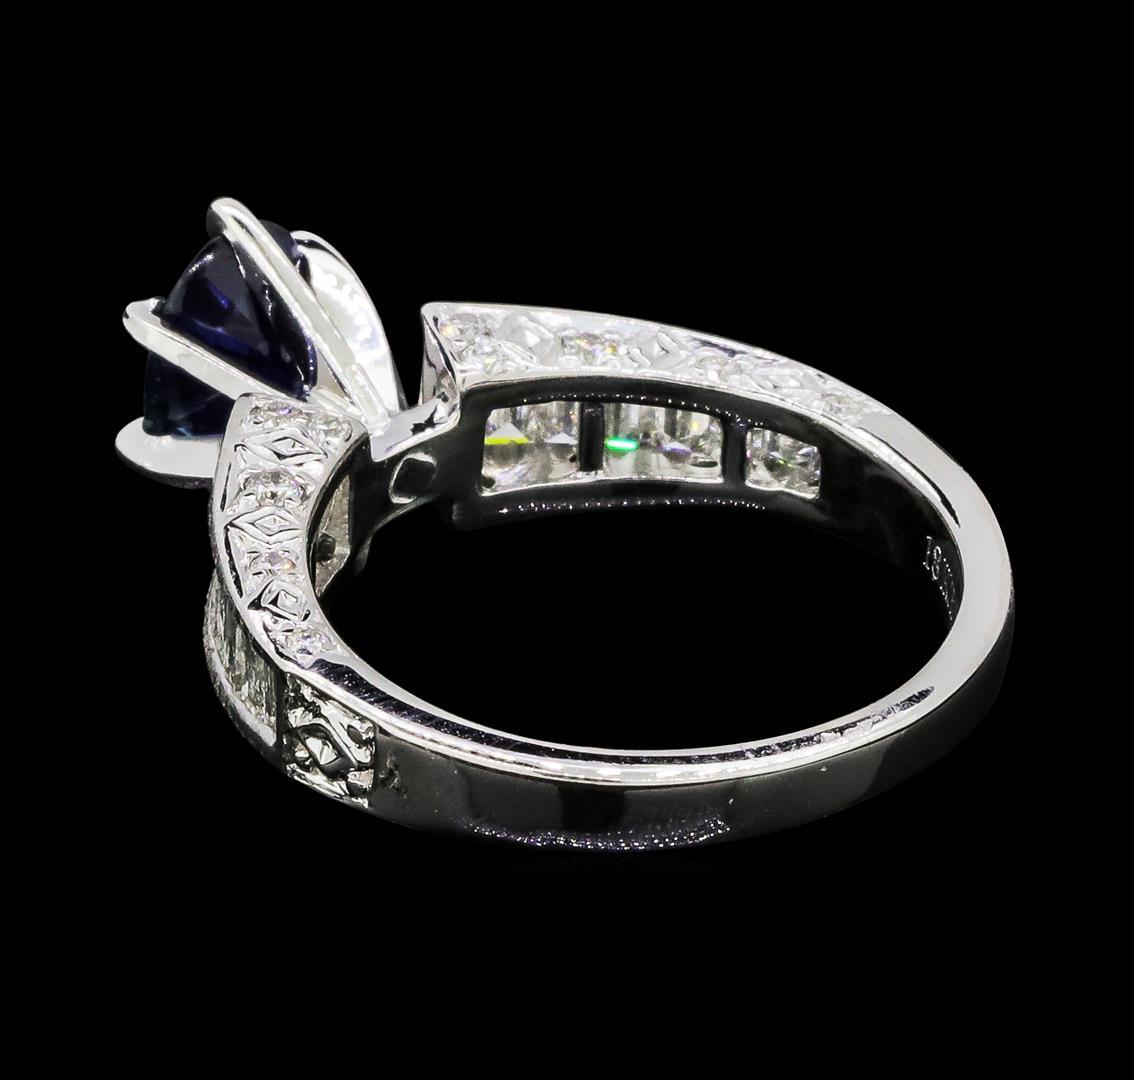 0.90 ctw Sapphire and Diamond Ring - 18KT White Gold